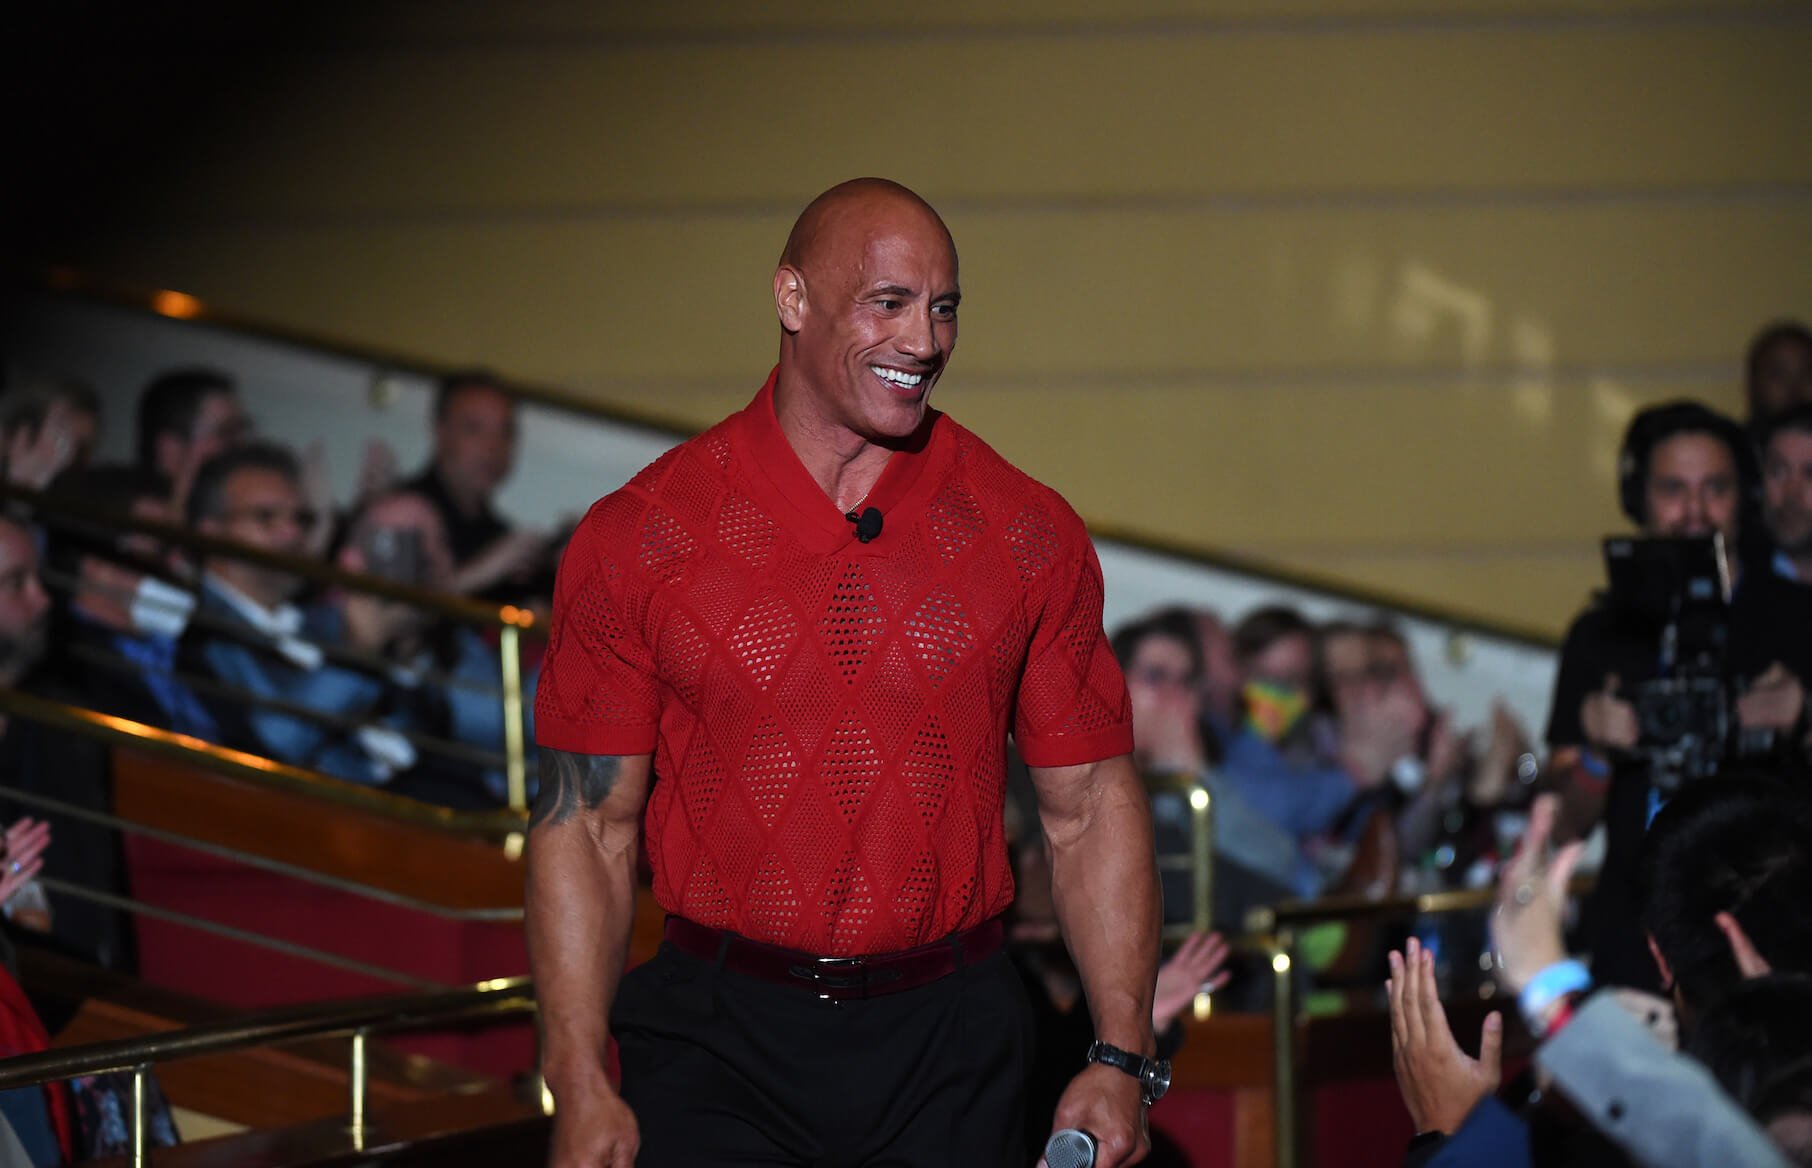 Dwayne 'The Rock' Johnson smiling with a crowd in the background in 2022. He's wearing a red T-shirt.